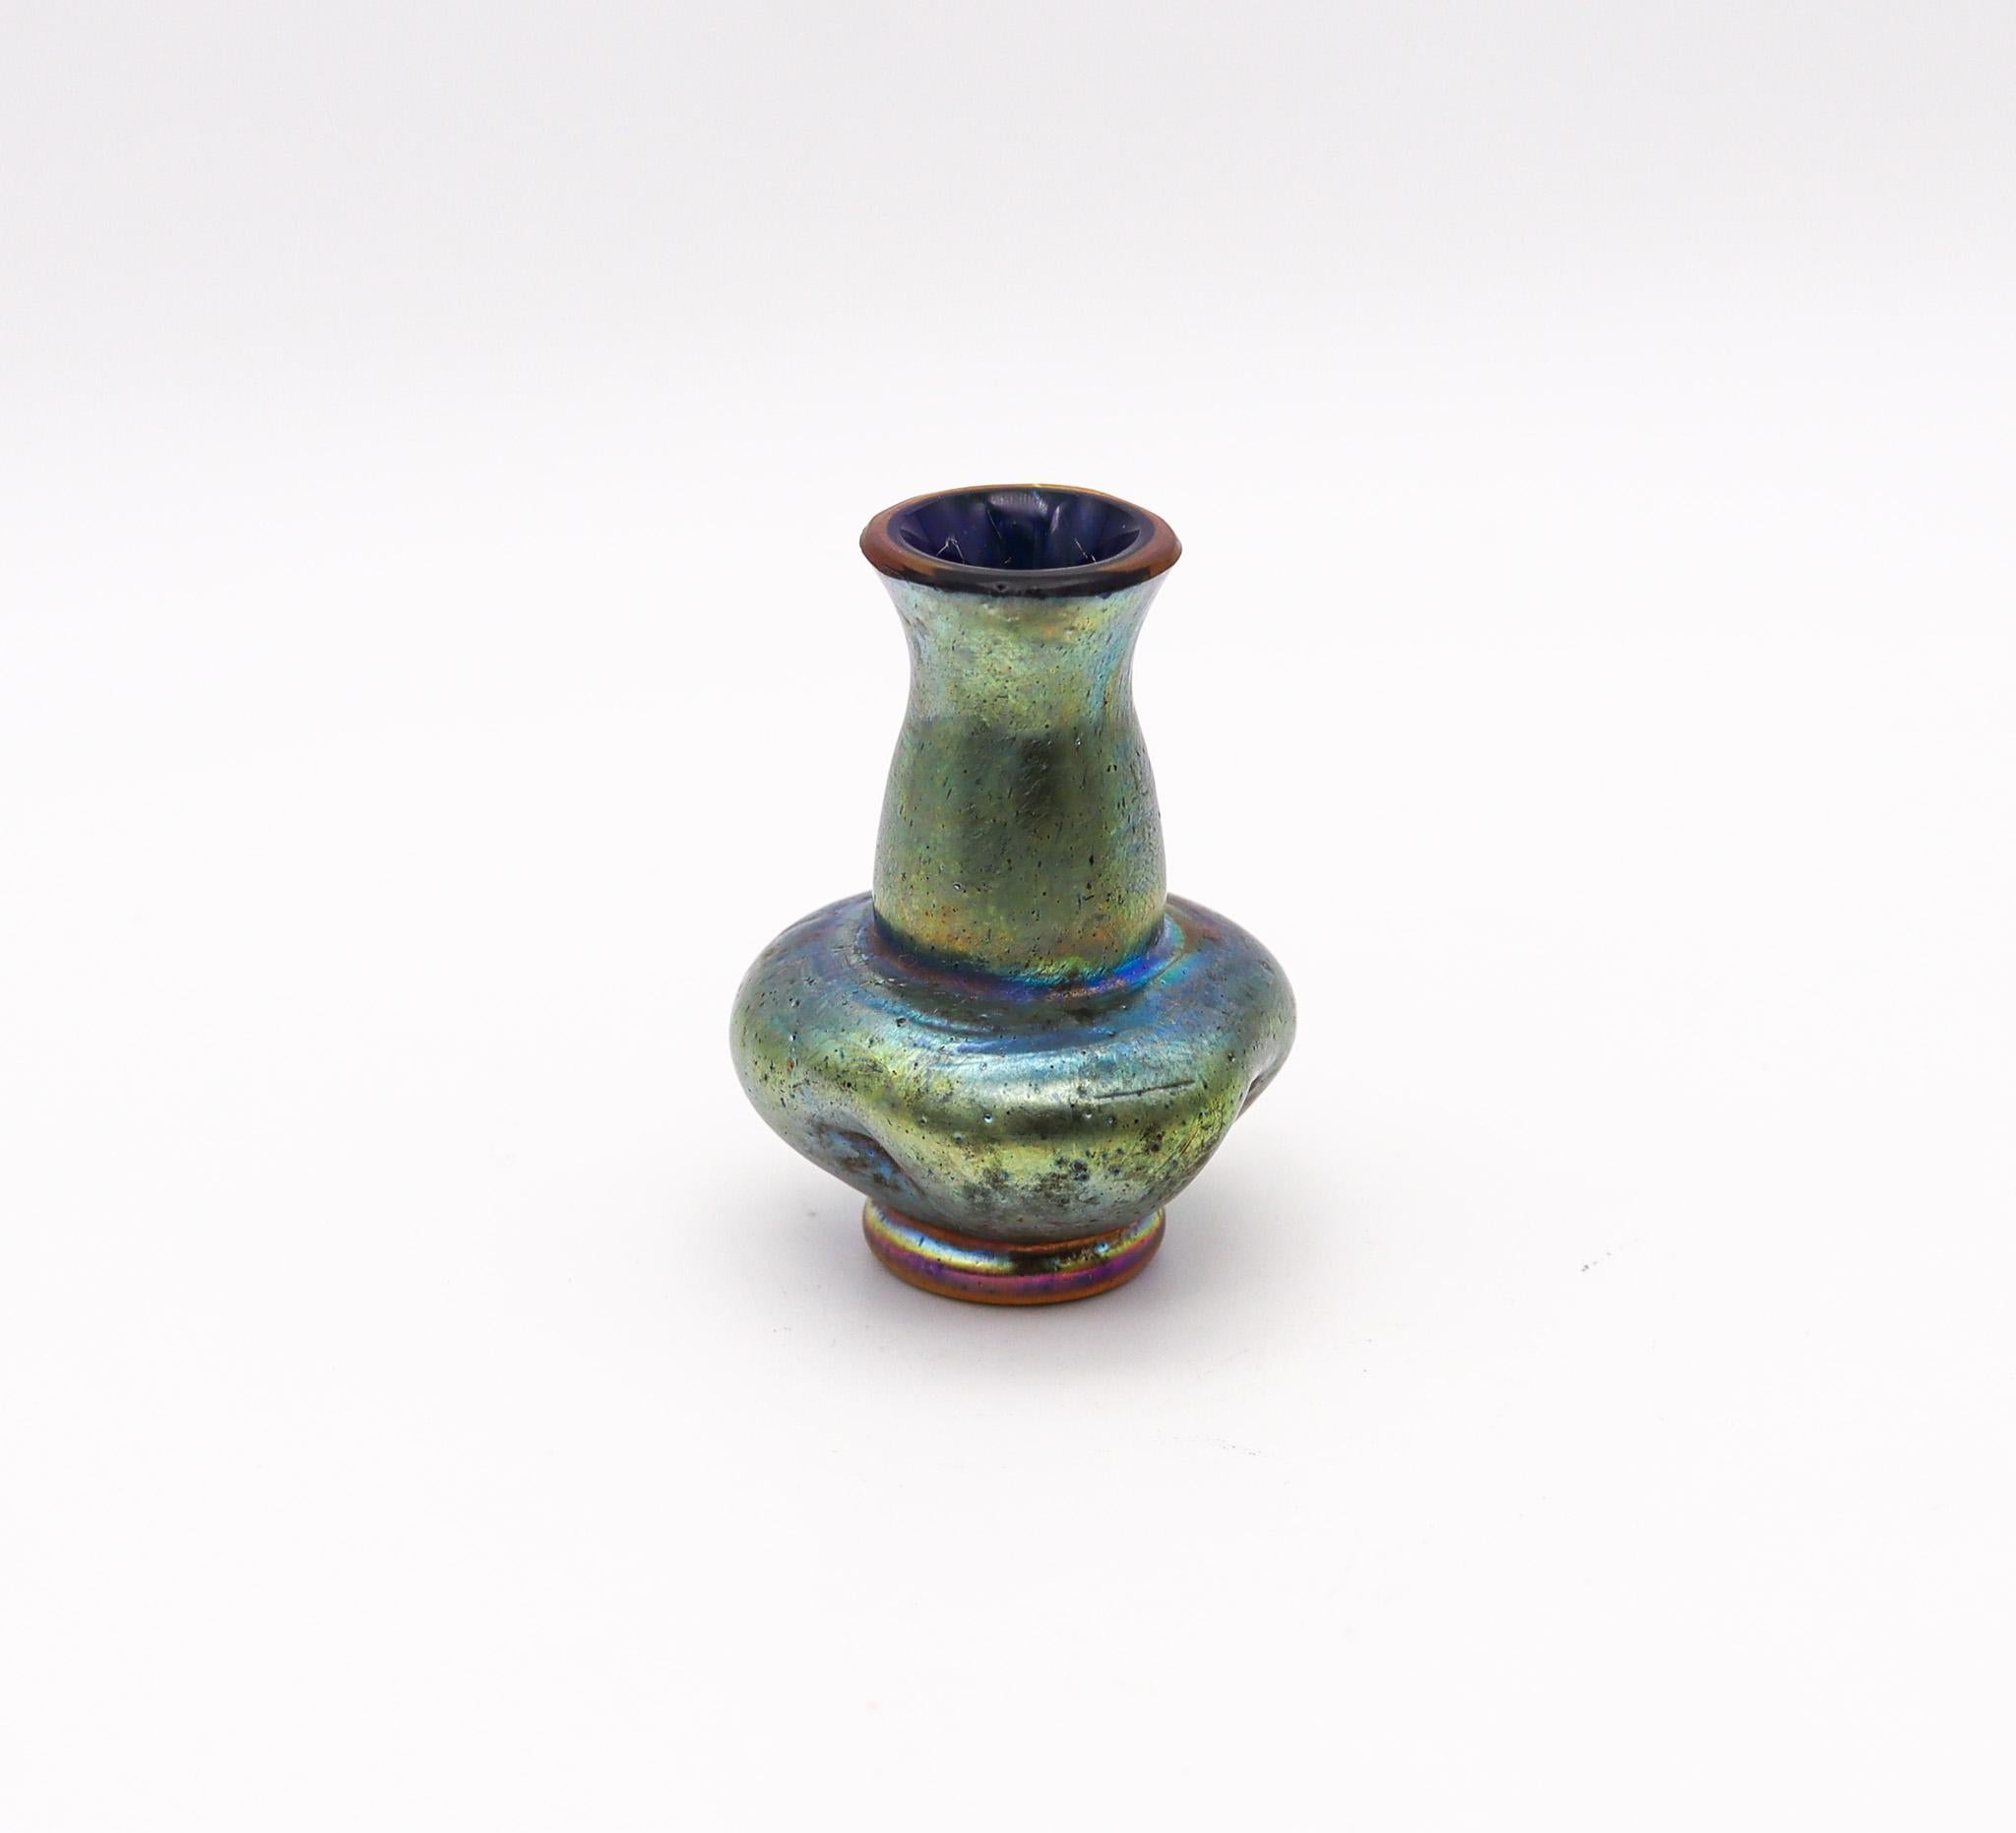 Miniature glass vase designed by Loetz.

Gorgeous and very beautiful antique miniature cabinet glass vase, created by Loetz. Made in Bohemia, Austria during the art nouveau period, back in the turn of the 20th century, circa 1900. Crafted with a